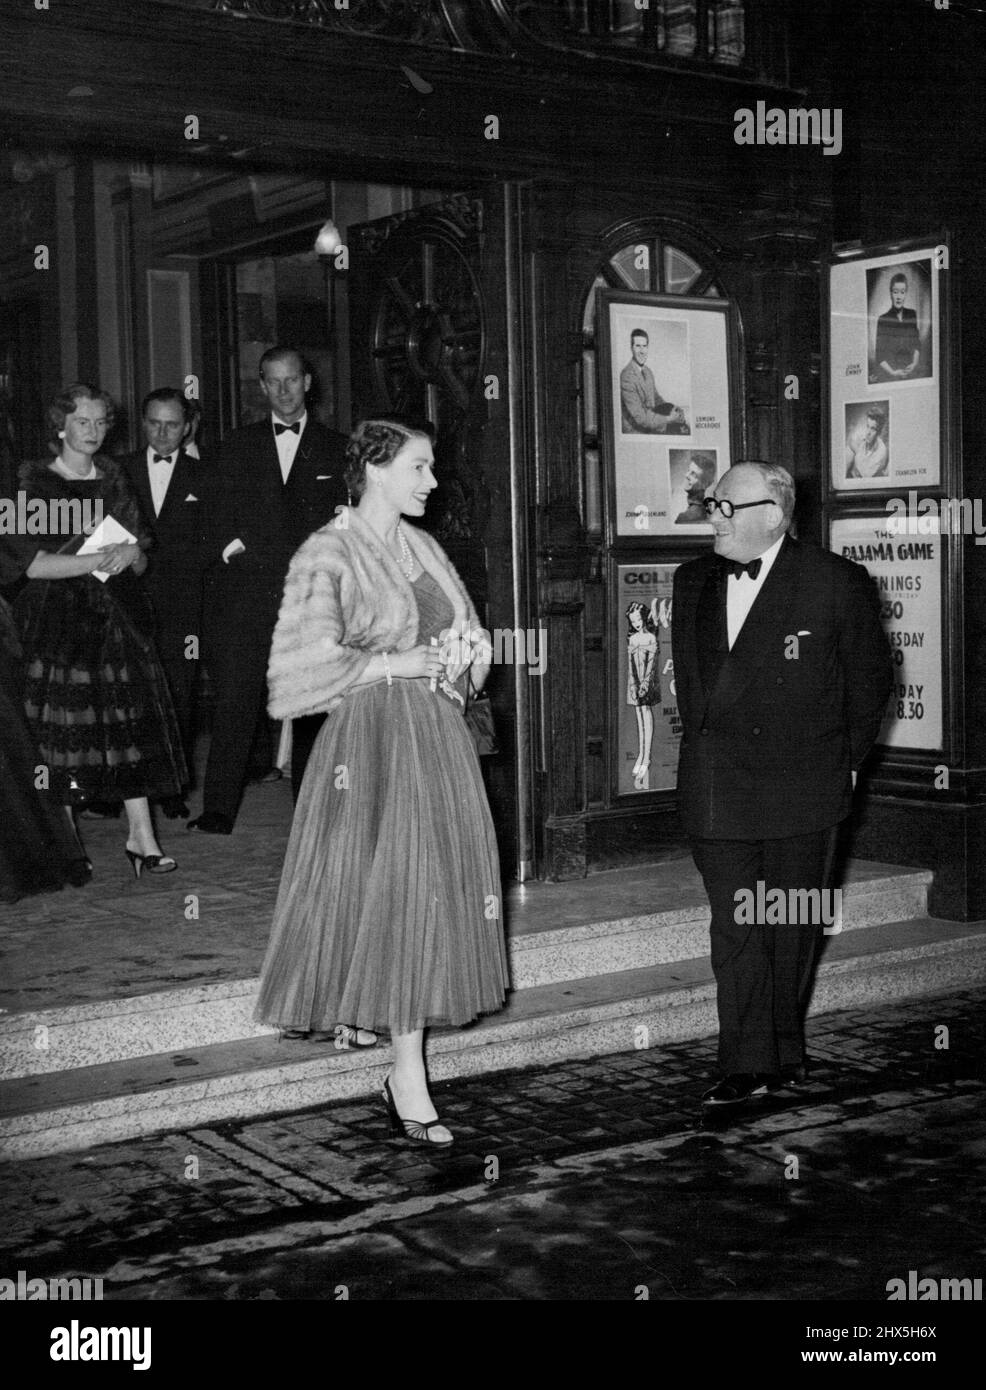 Queen Elizabeth At 'Pajama Game.' Britain's Queen Elizabeth went Tuesday night to see the London version of the smash-hit American musical 'The Pajama Game.' Picture shows the Queen smiling with pleasure as she leaves the theatre at show's end. In background can be seen her consort, the Duke of Edinburgh. November 8, 1955. Stock Photo